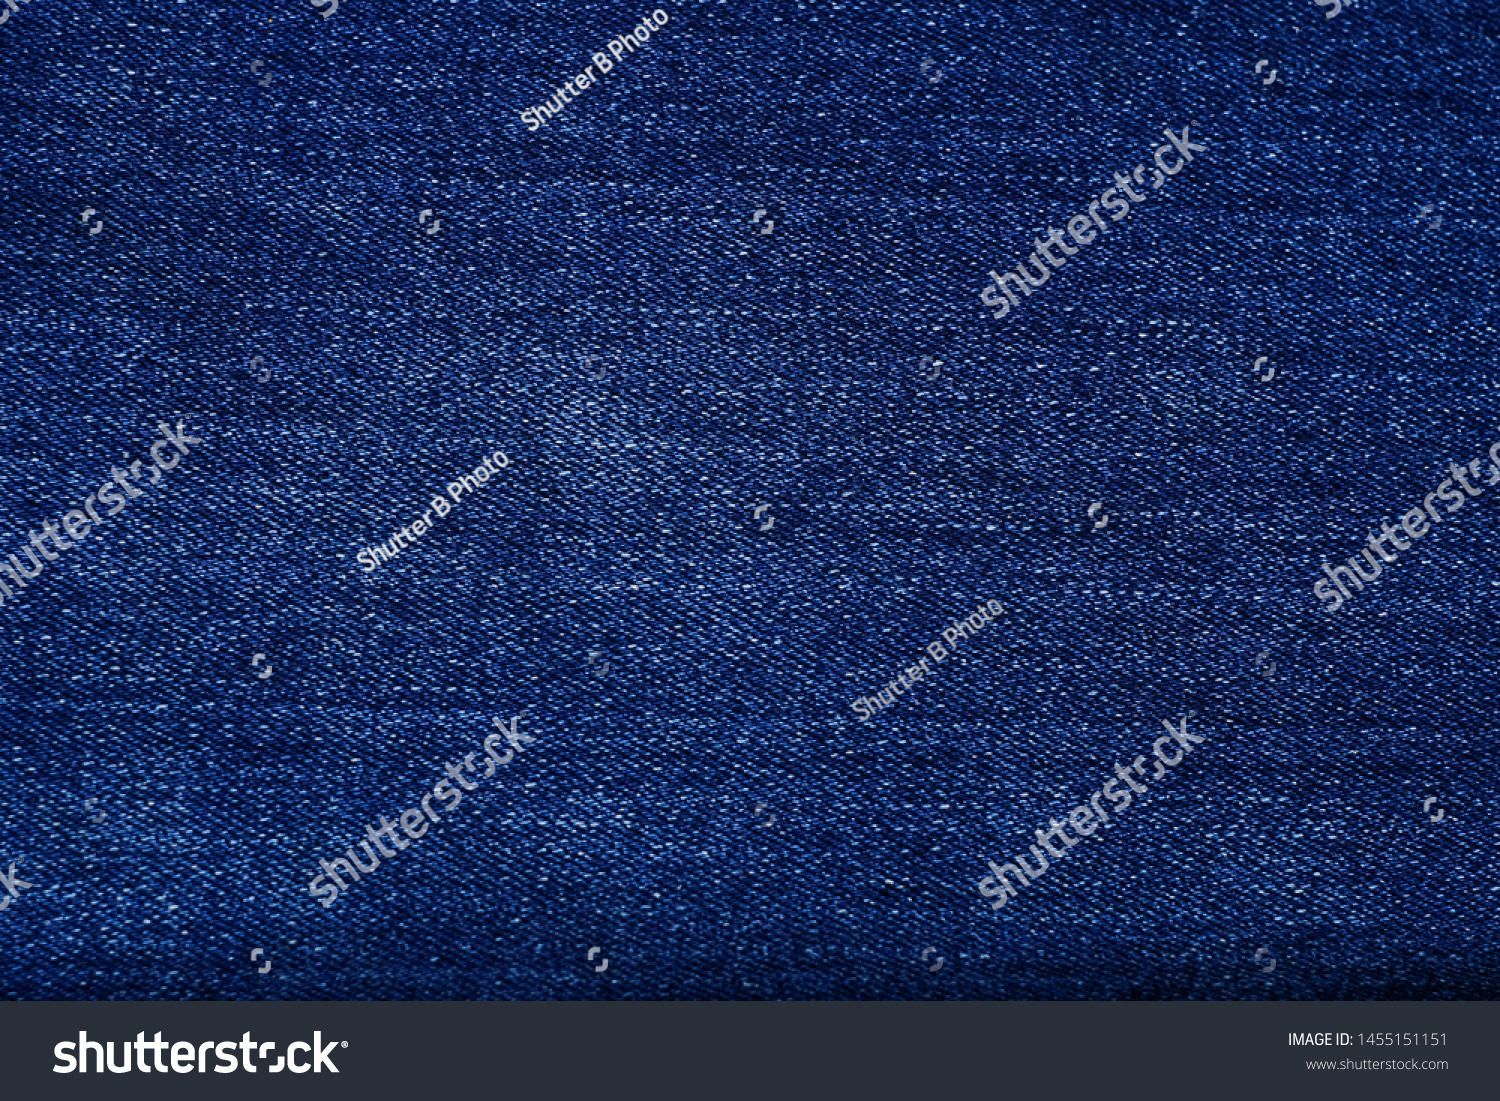 texture of Denim jeans fabric background .
 #1455151151